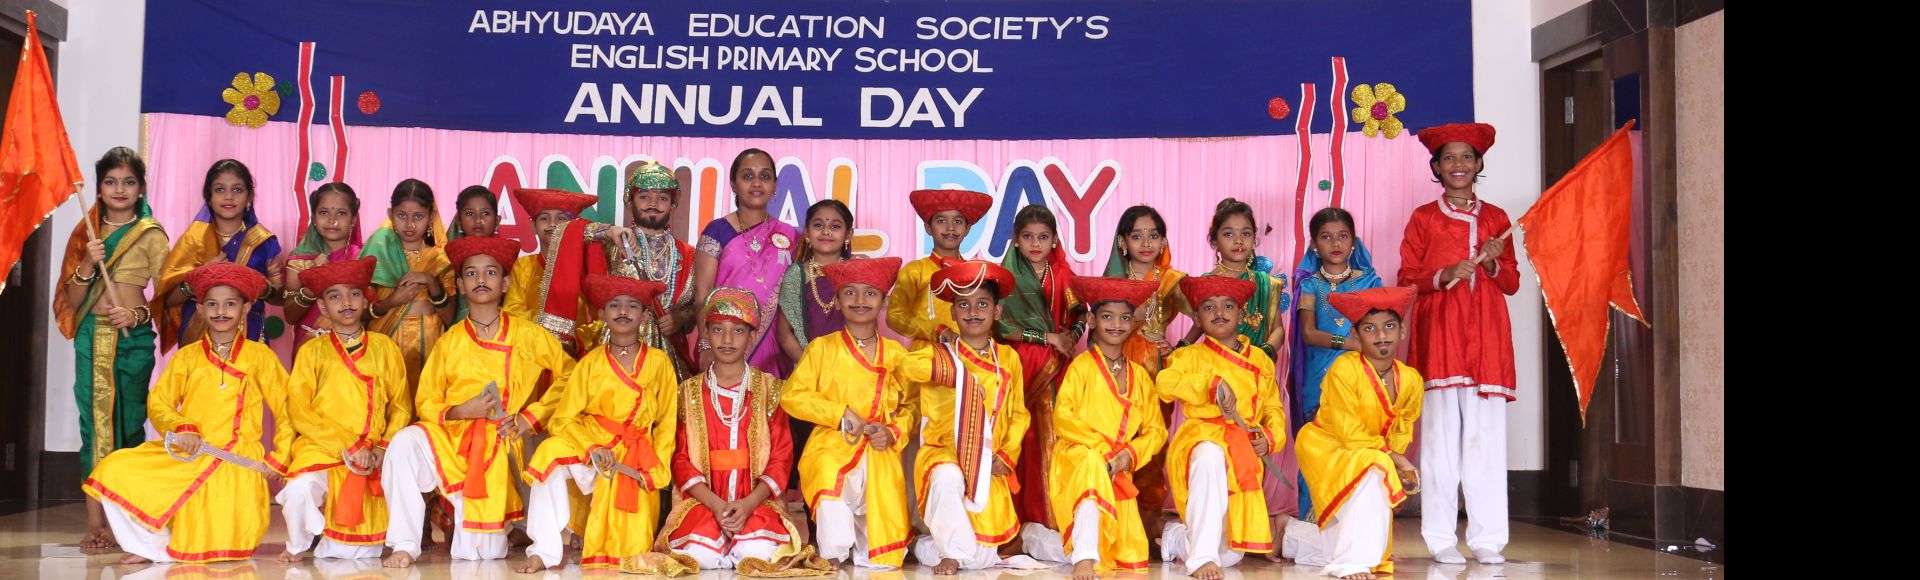 Annual Day  English Primary